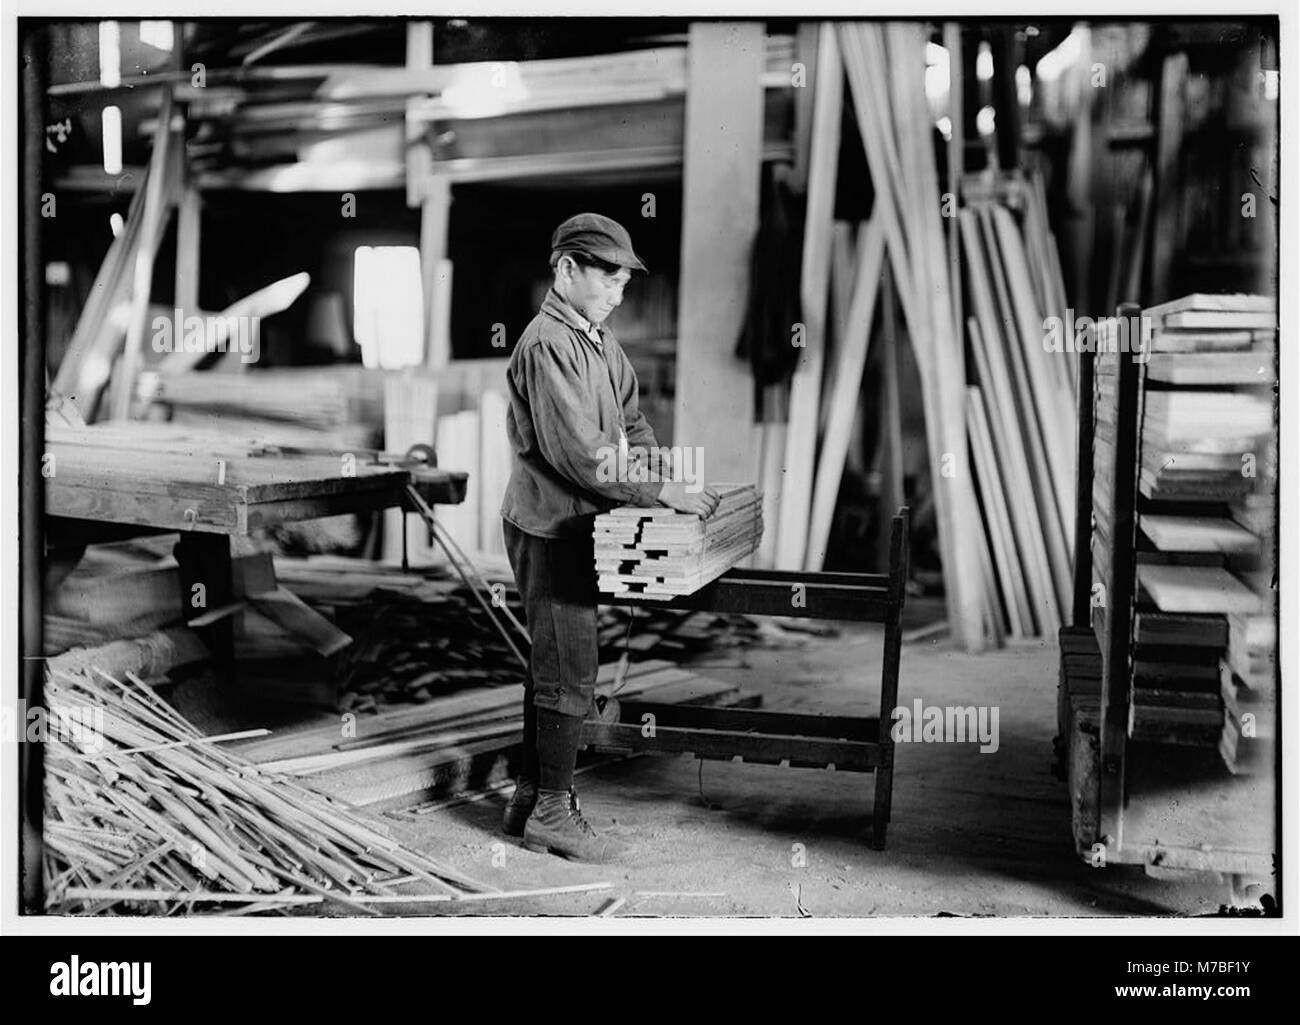 Boy probably about 13 years old, tying strips which he has taken away from the planer. Schultze Waltum Co., Planing Mill. LOC nclc.05372 Stock Photo